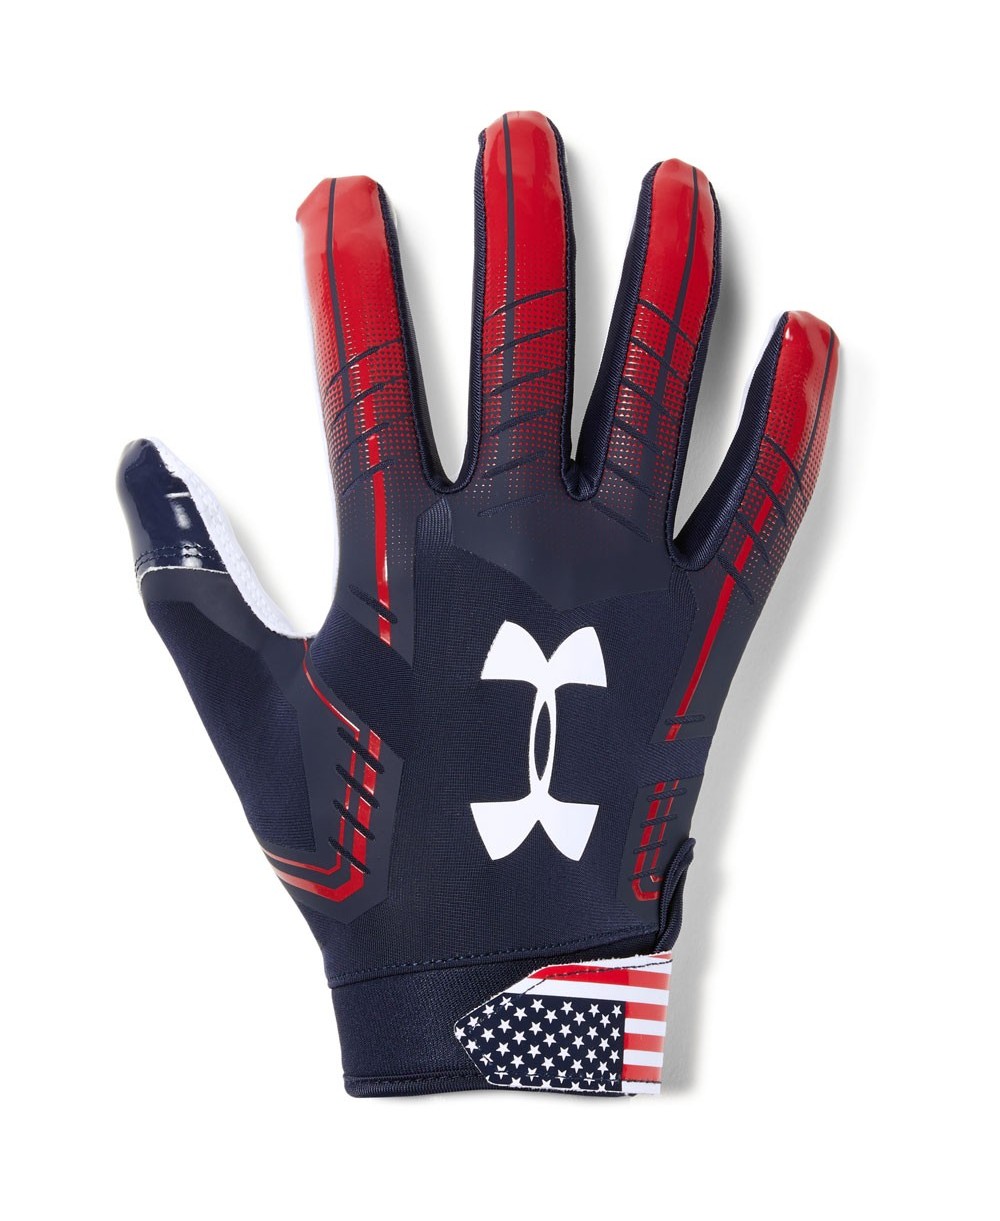 Under Armour UA F6 Youth Glue Grip YLG Football Gloves 1304695 001 for sale online 